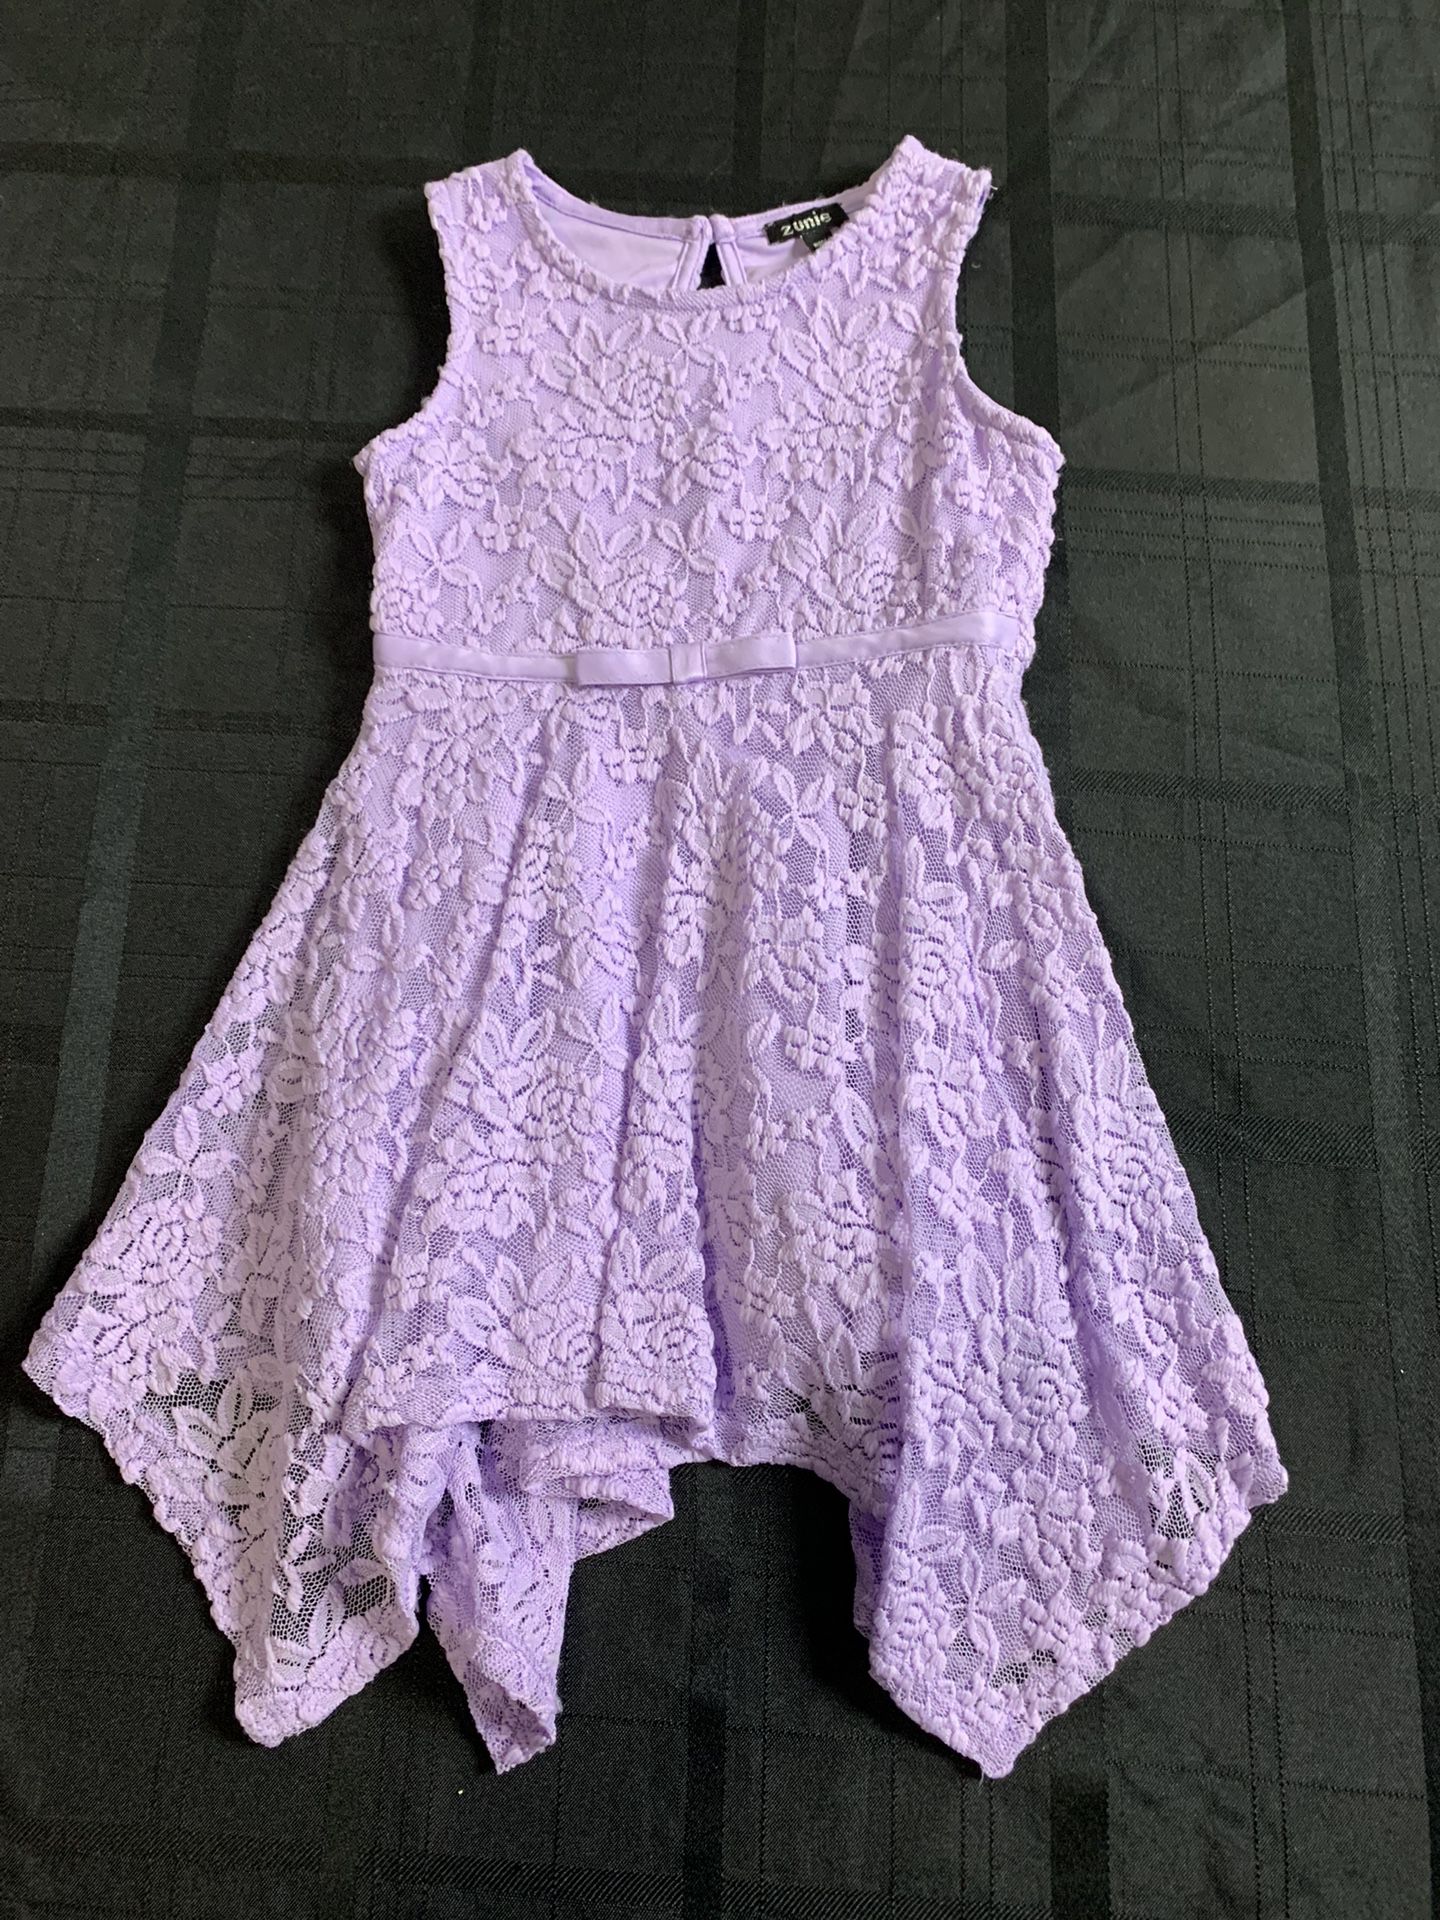 Zunie girls size 4 purple lacey spring Easter dress 